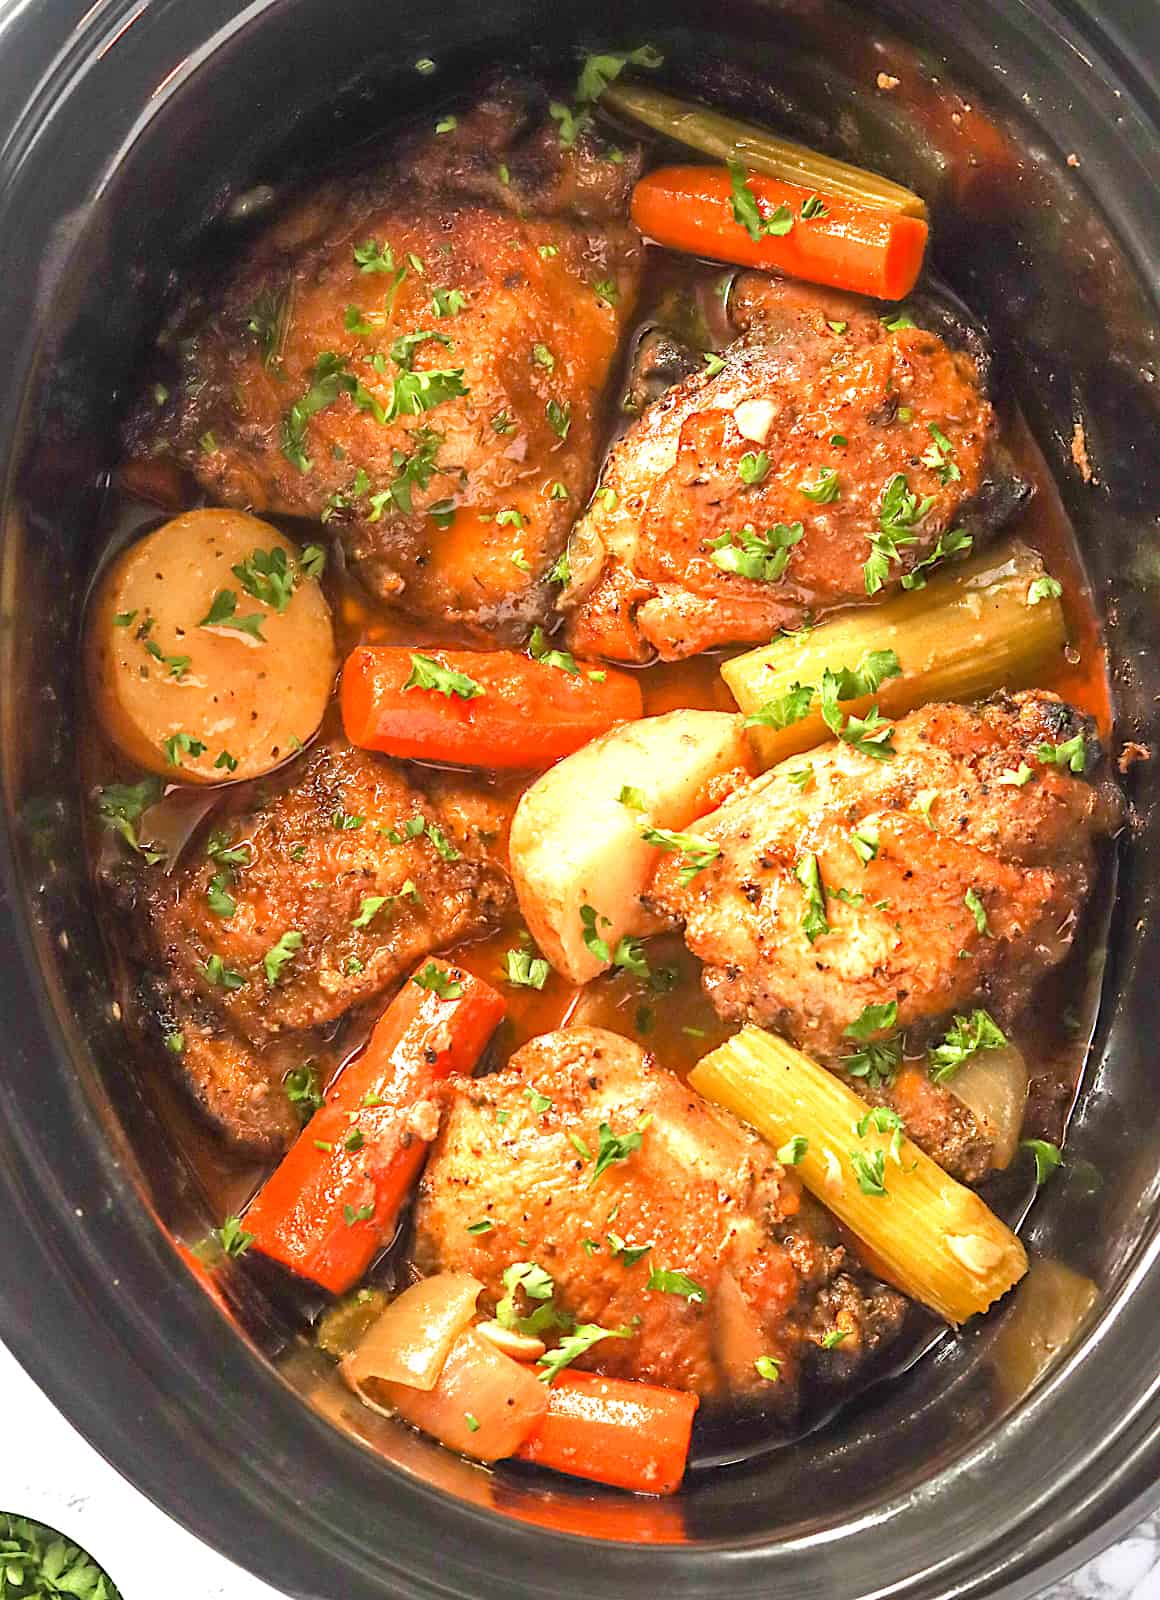 Slow cooker chicken thighs ready to serve